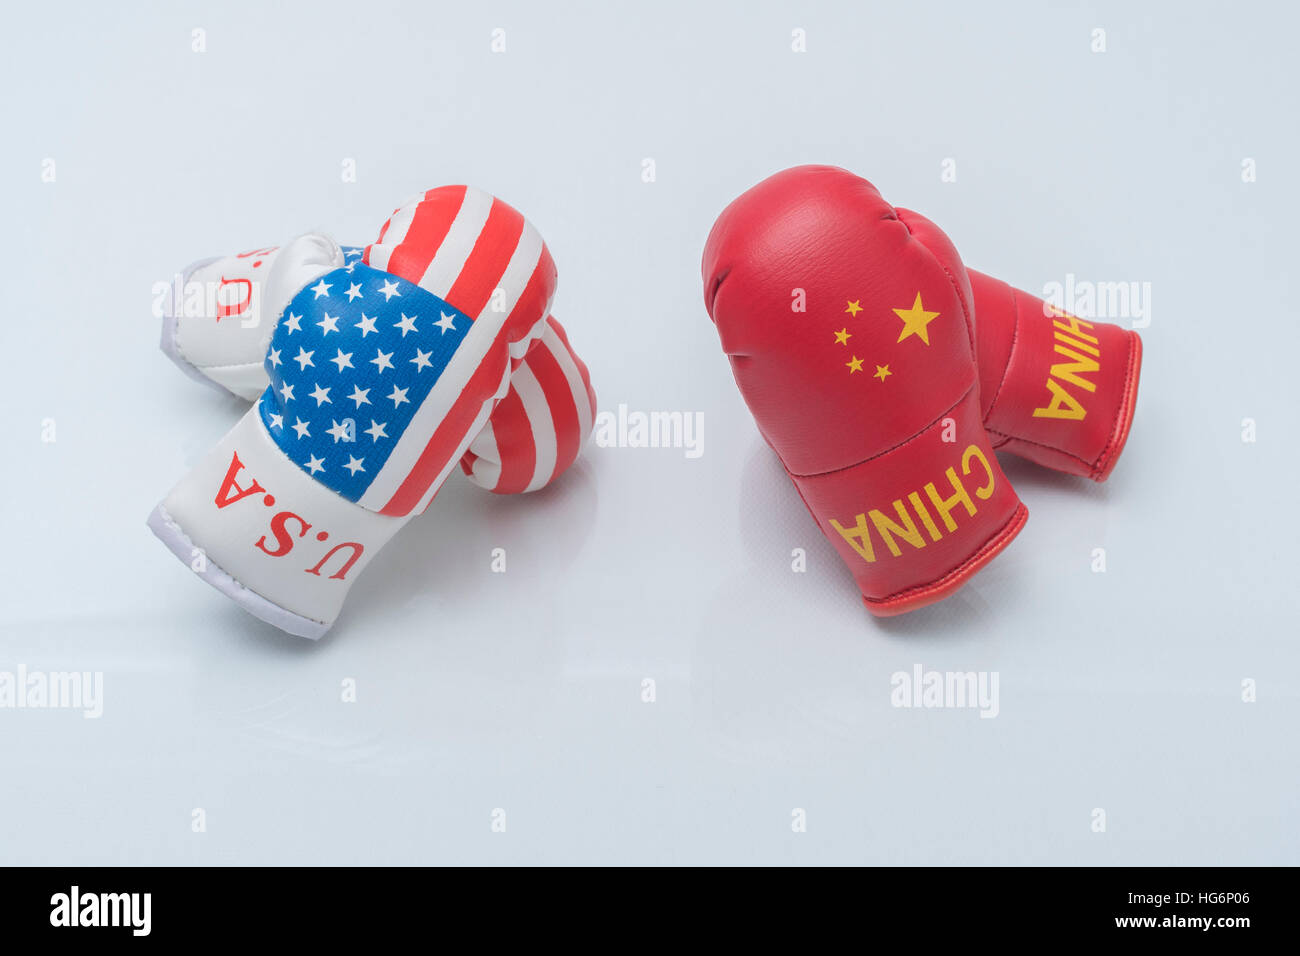 Mini US Stars & Stripes boxing gloves - metaphor for concept of US-Chinese tensions, US-China trade war, tariff war, standoff, the gloves are off. Stock Photo